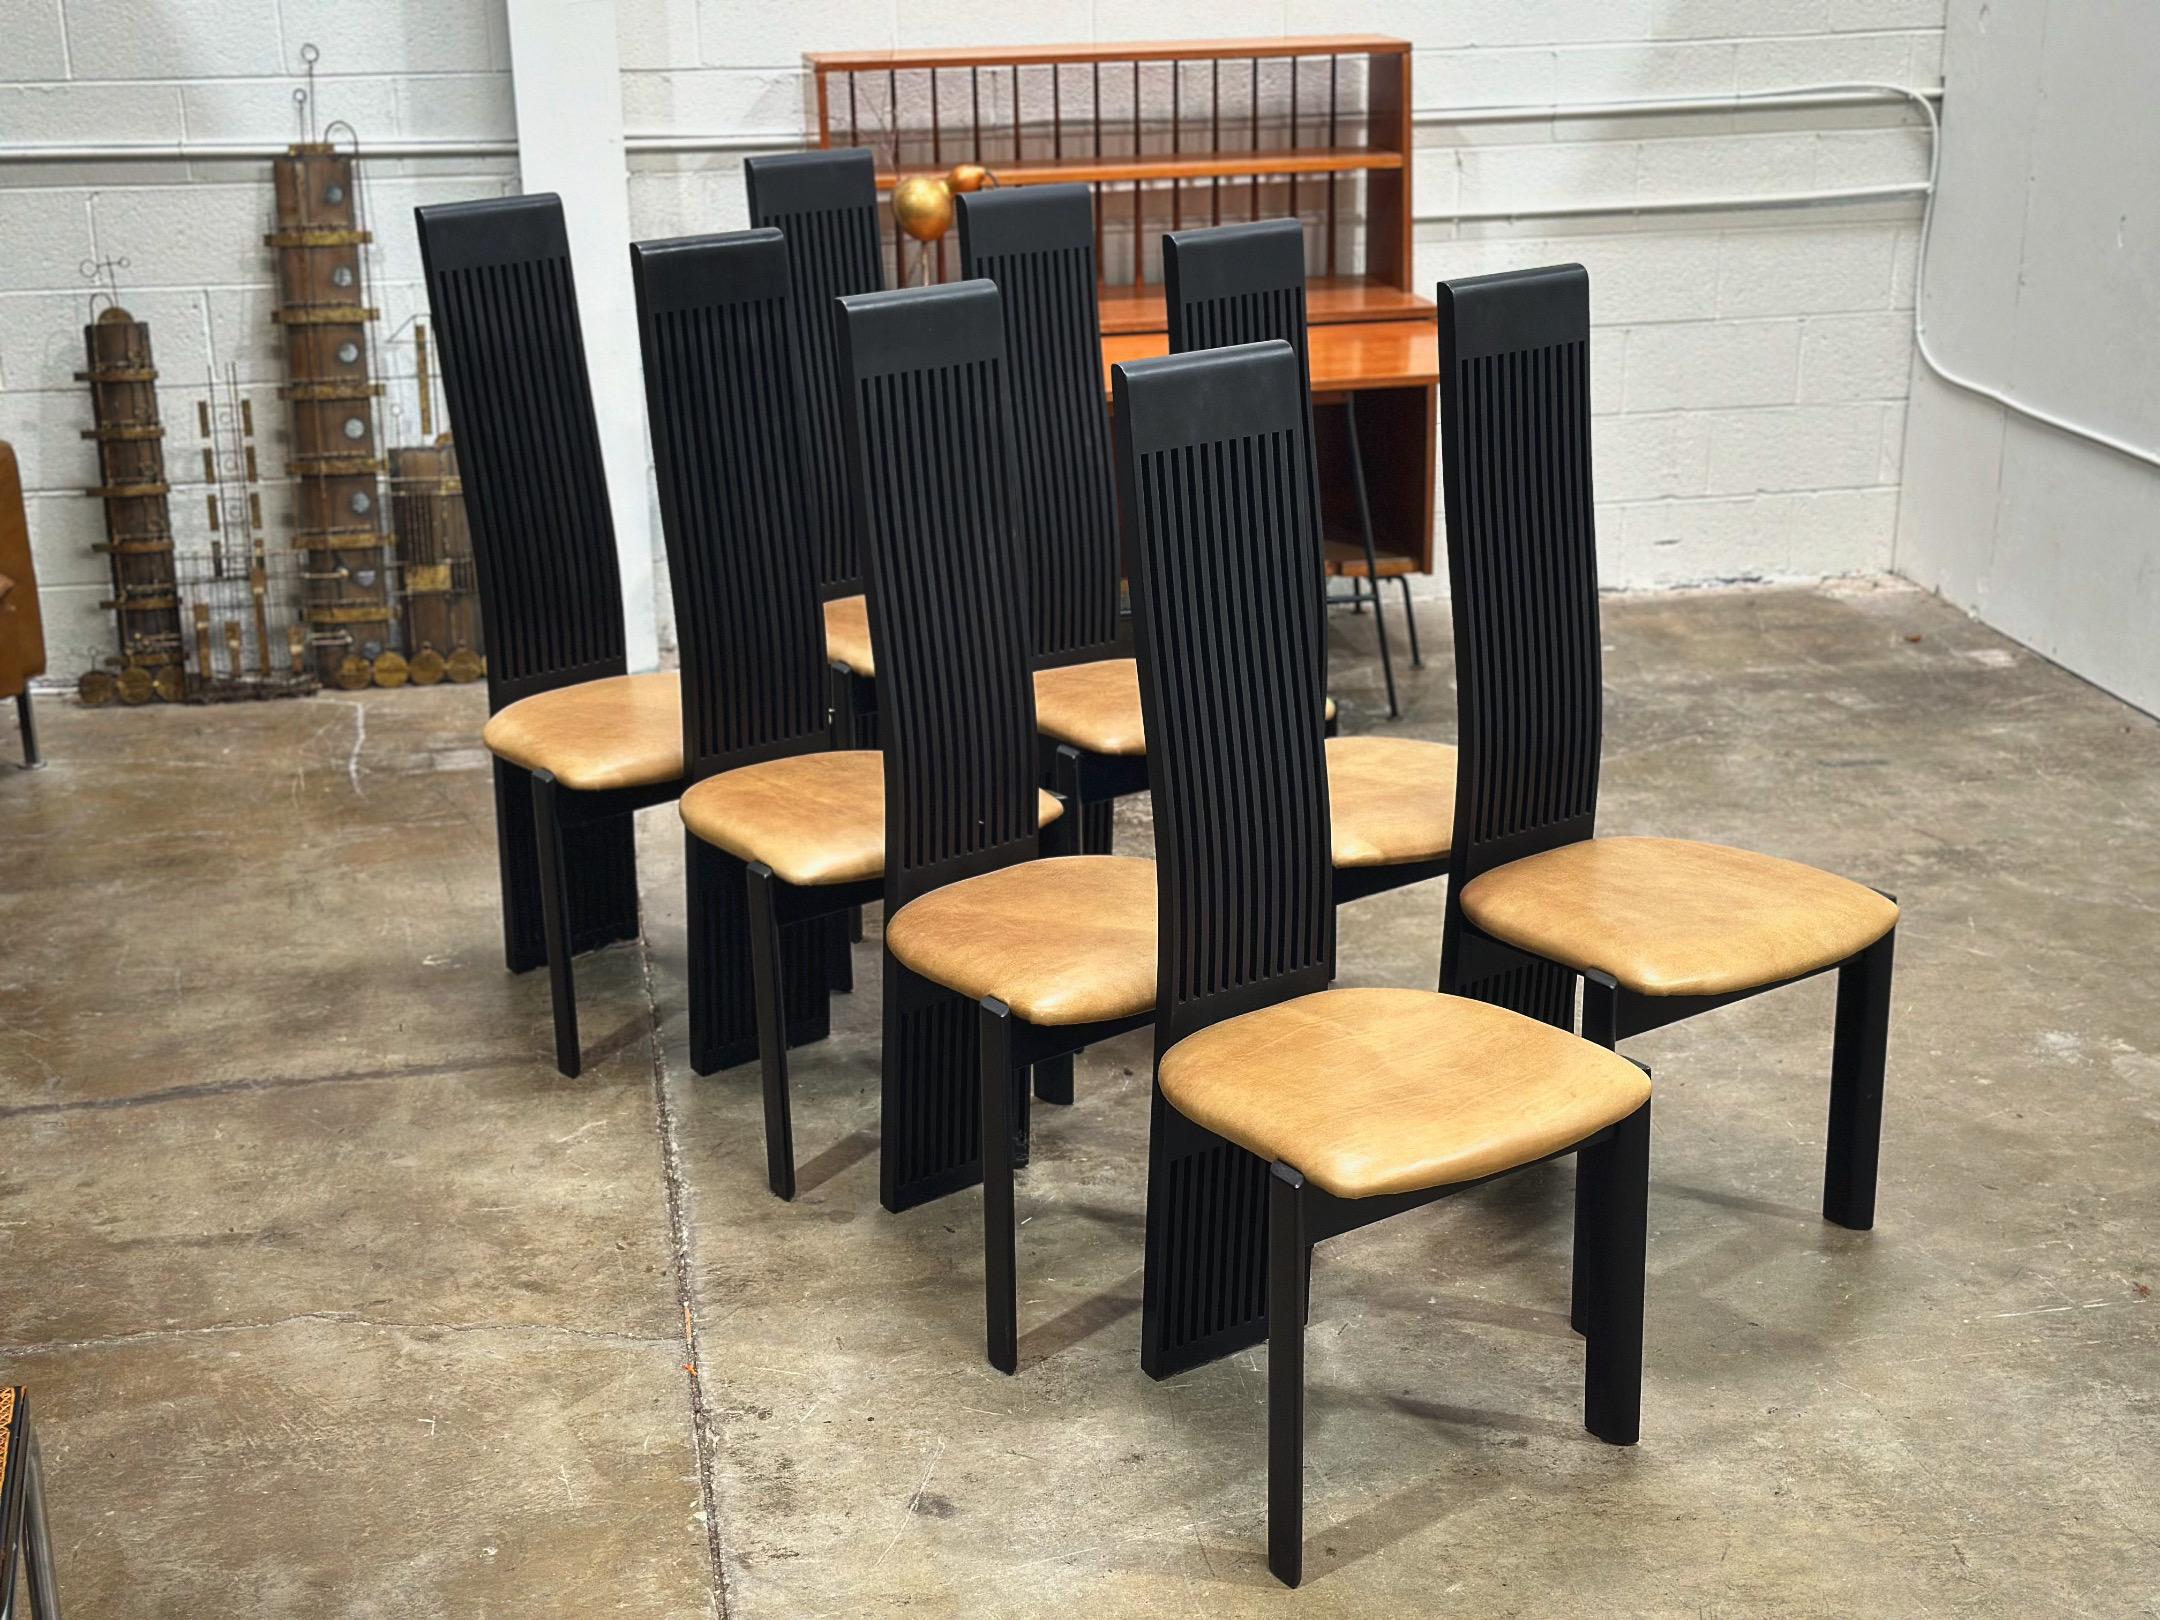 Post Modern High Back Leather Dining Chairs - Pietro Consantini - Set of 8 For Sale 1